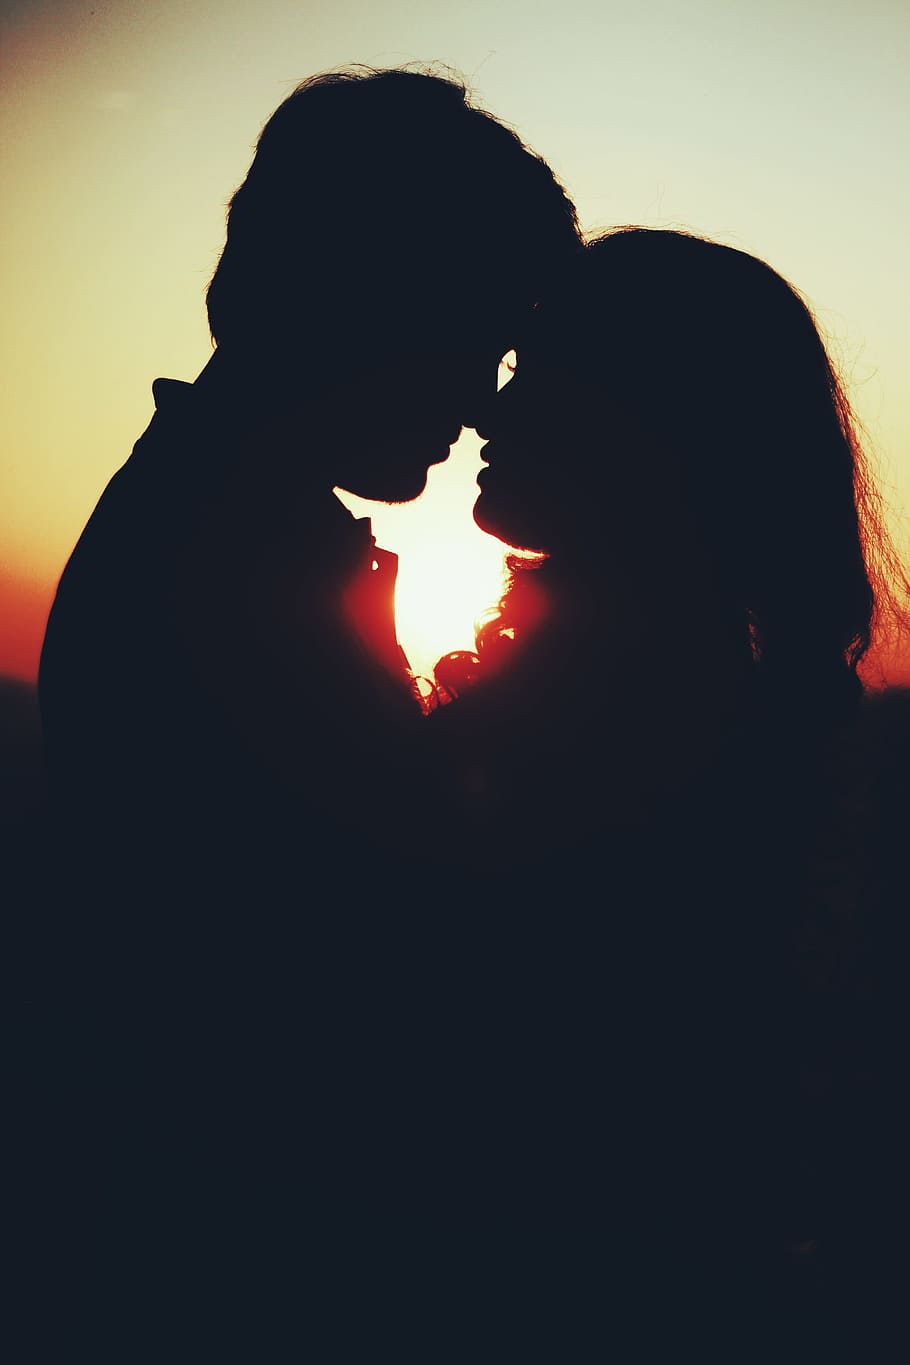 Silhouette Photo of Man and Woman About to Kiss, backlit, dawn